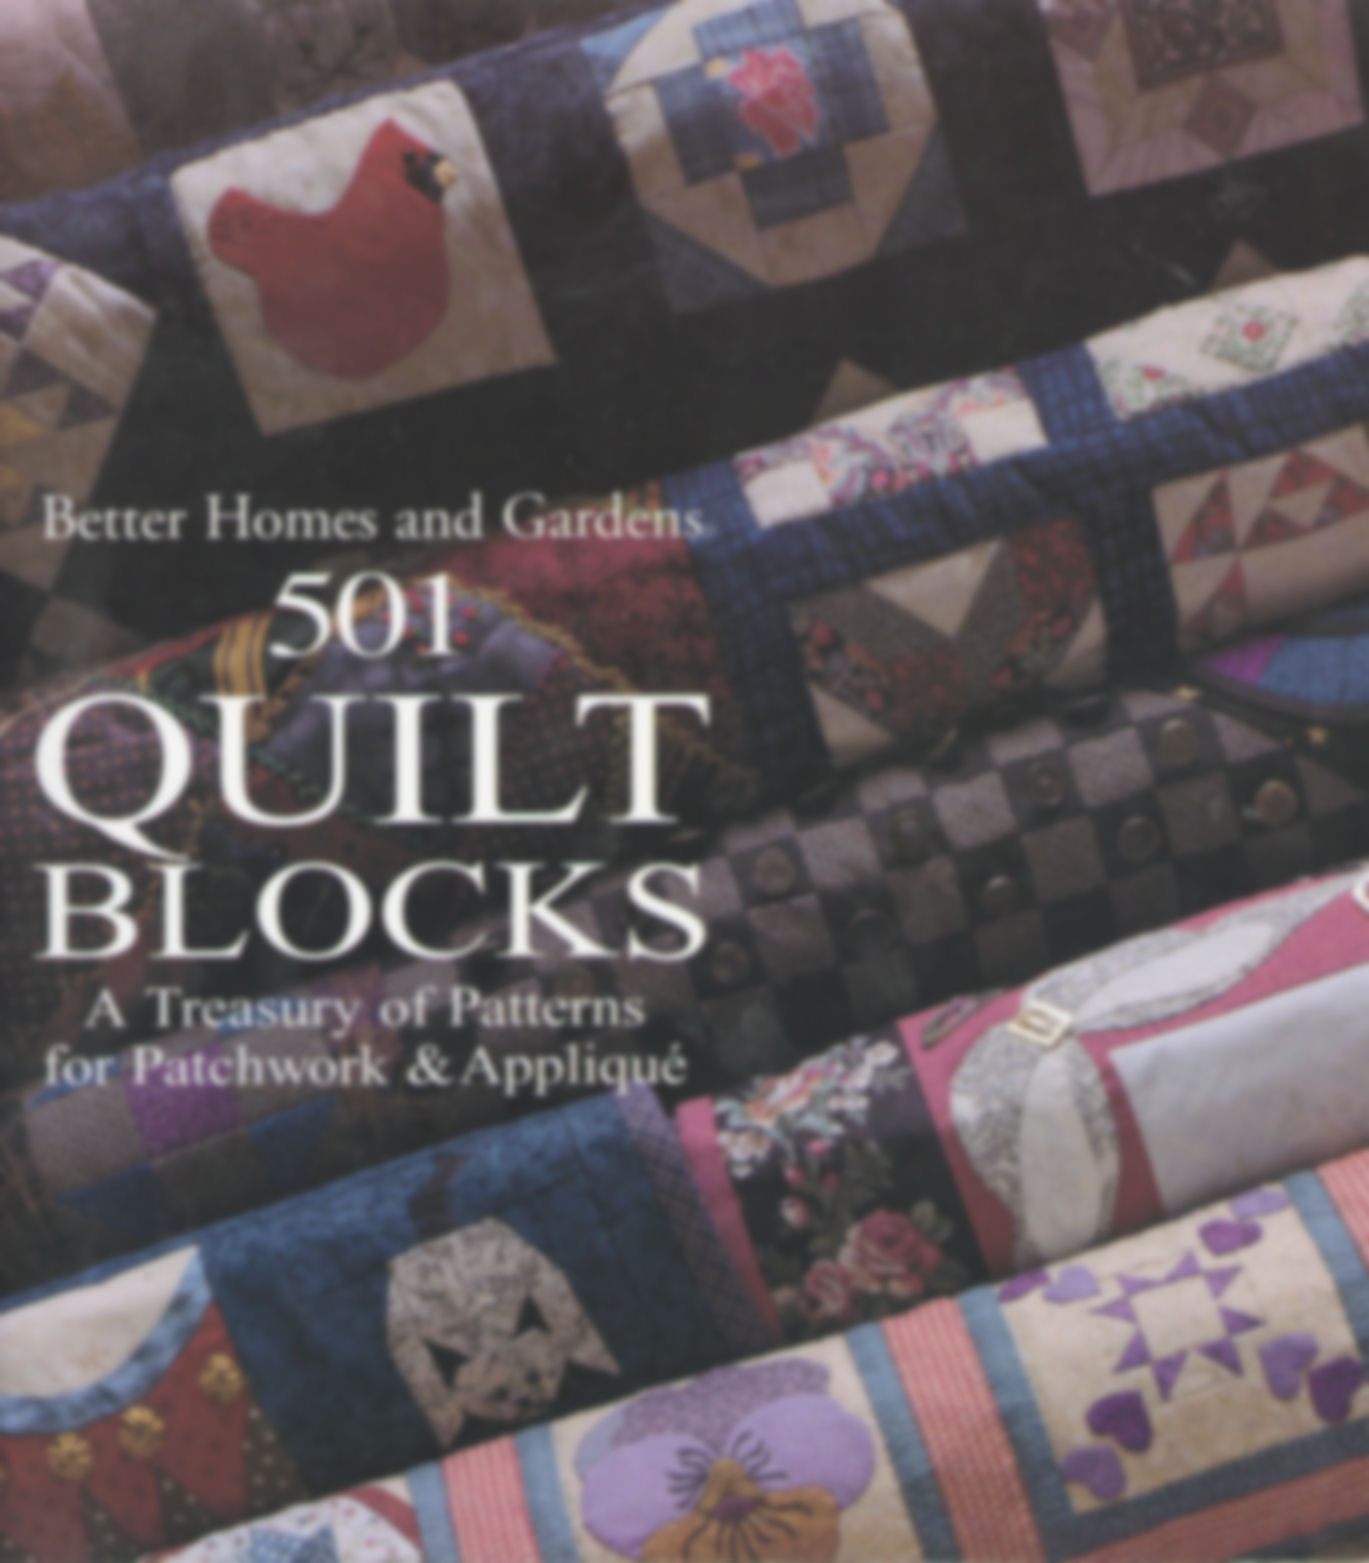 501 Quilt Blocks A Treasury of Patterns for Patchwork & Appliqué